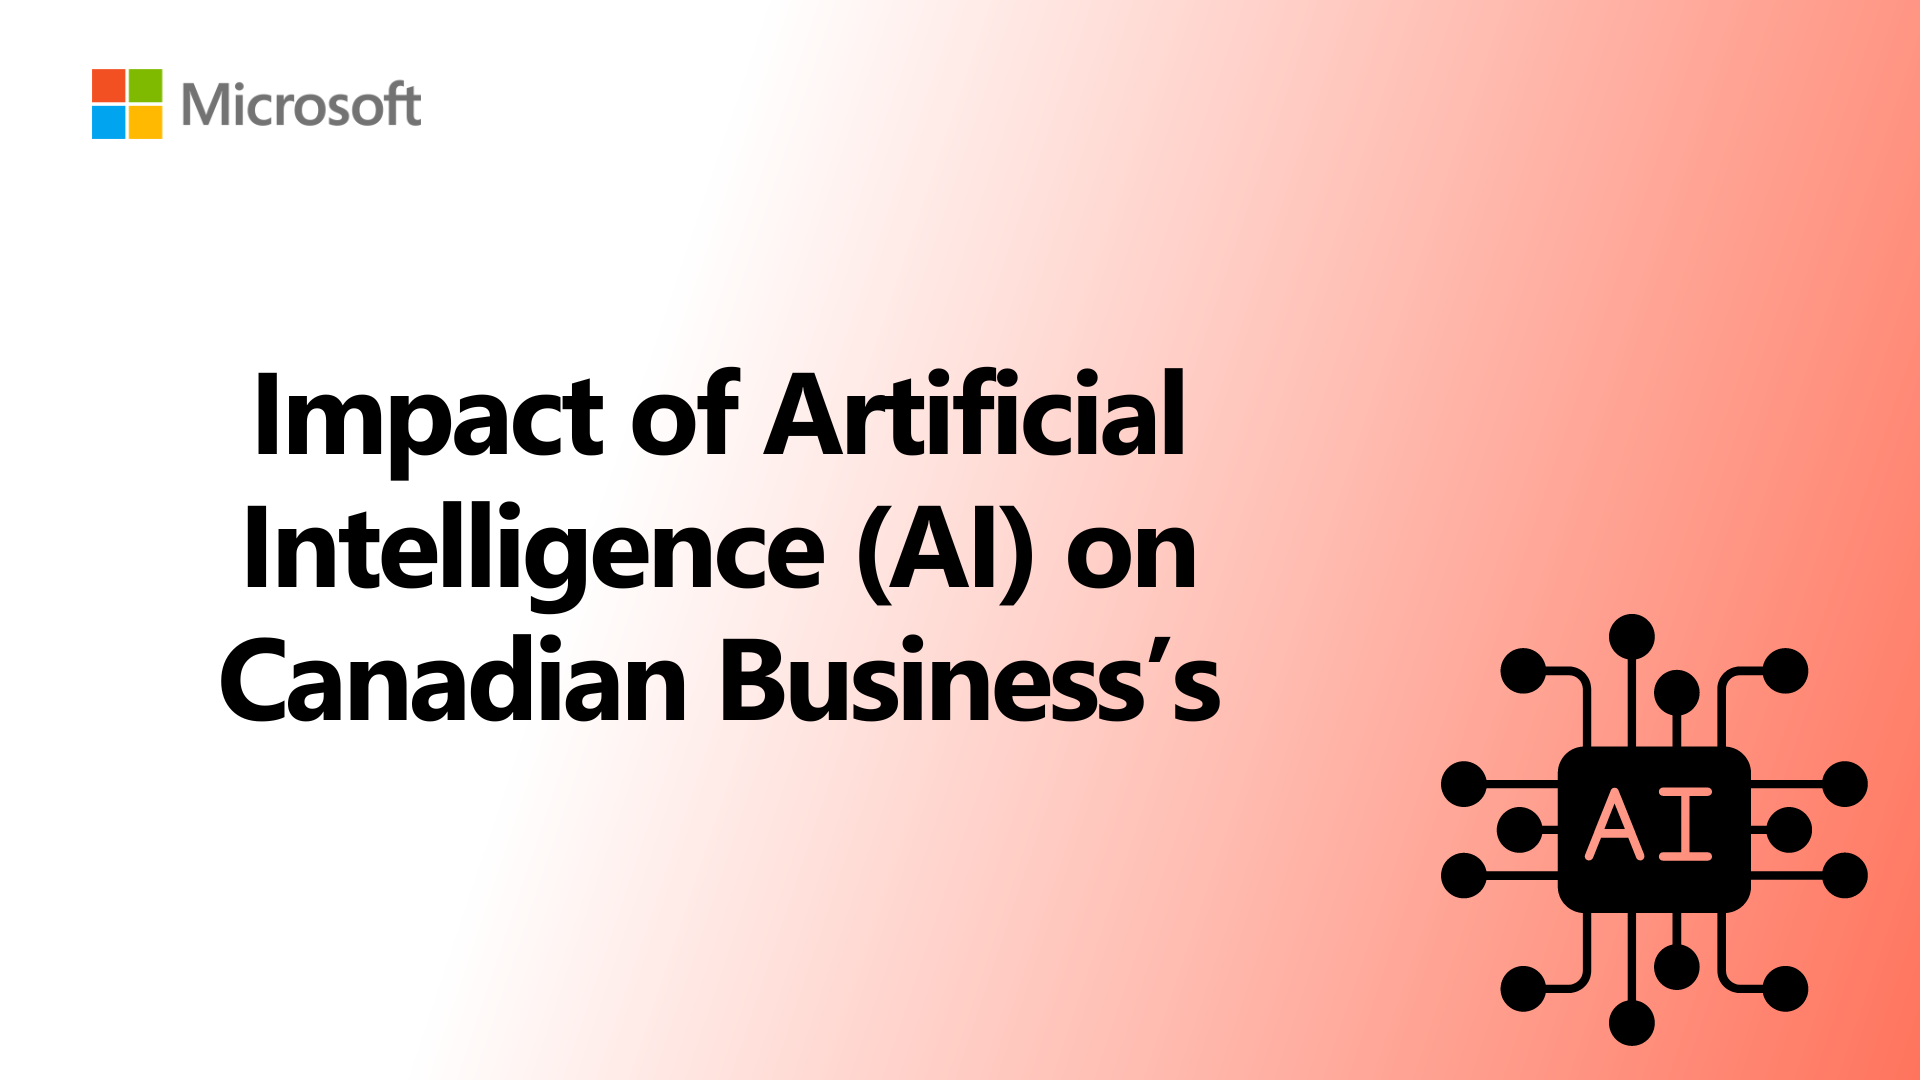 Impact of Artificial Intelligence (AI) on Canadian Business’s